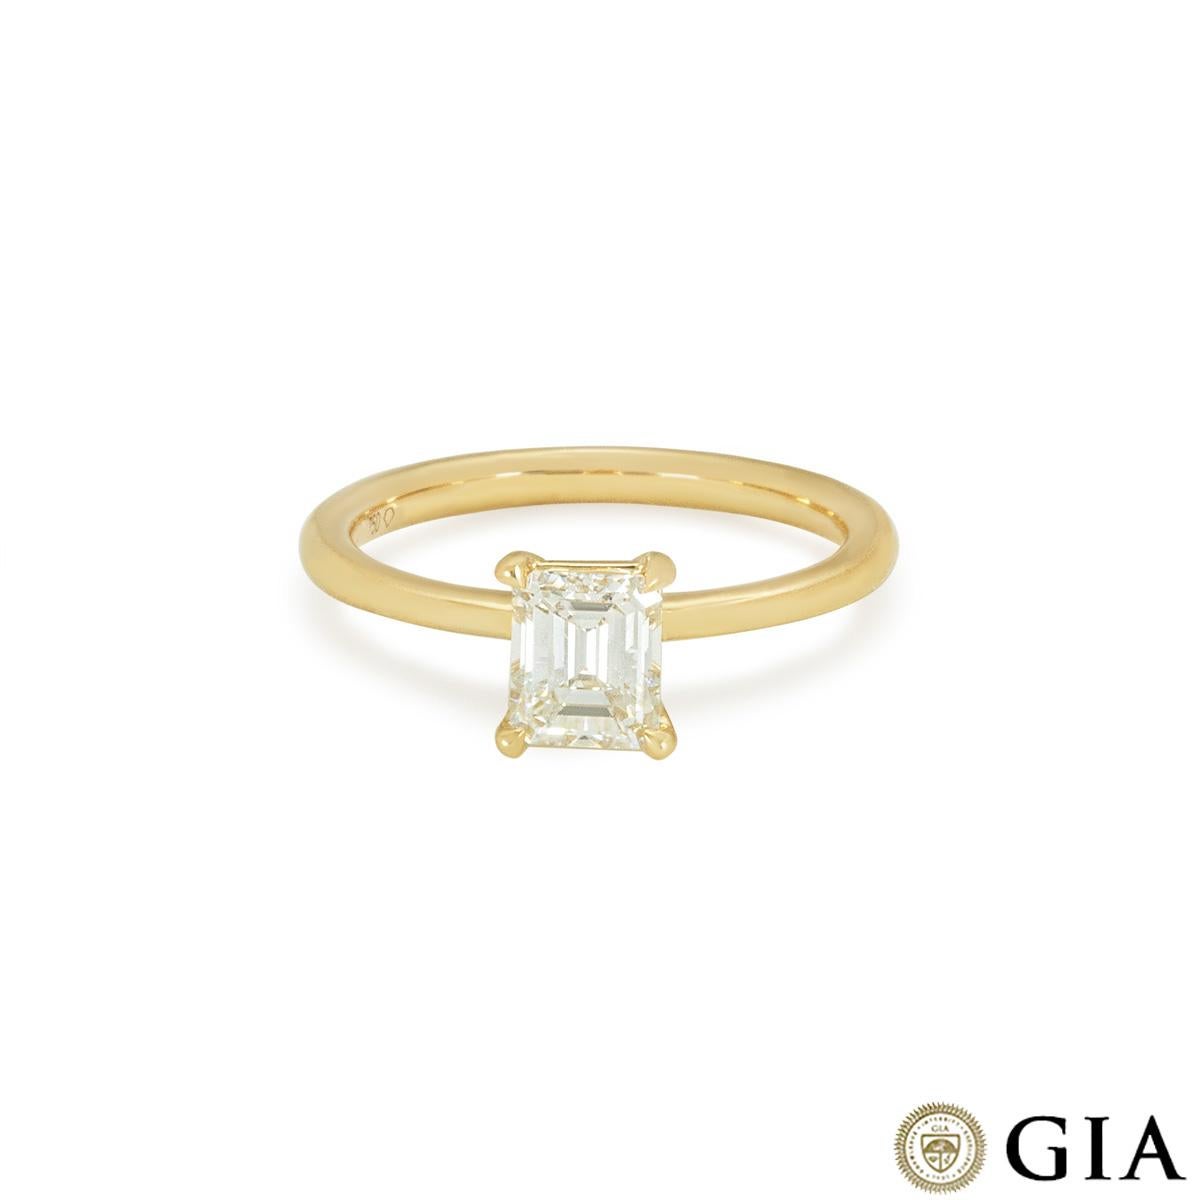 GIA Certified Yellow Gold Emerald Cut Diamond Ring 0.83 Carat E/VS1 In New Condition For Sale In London, GB